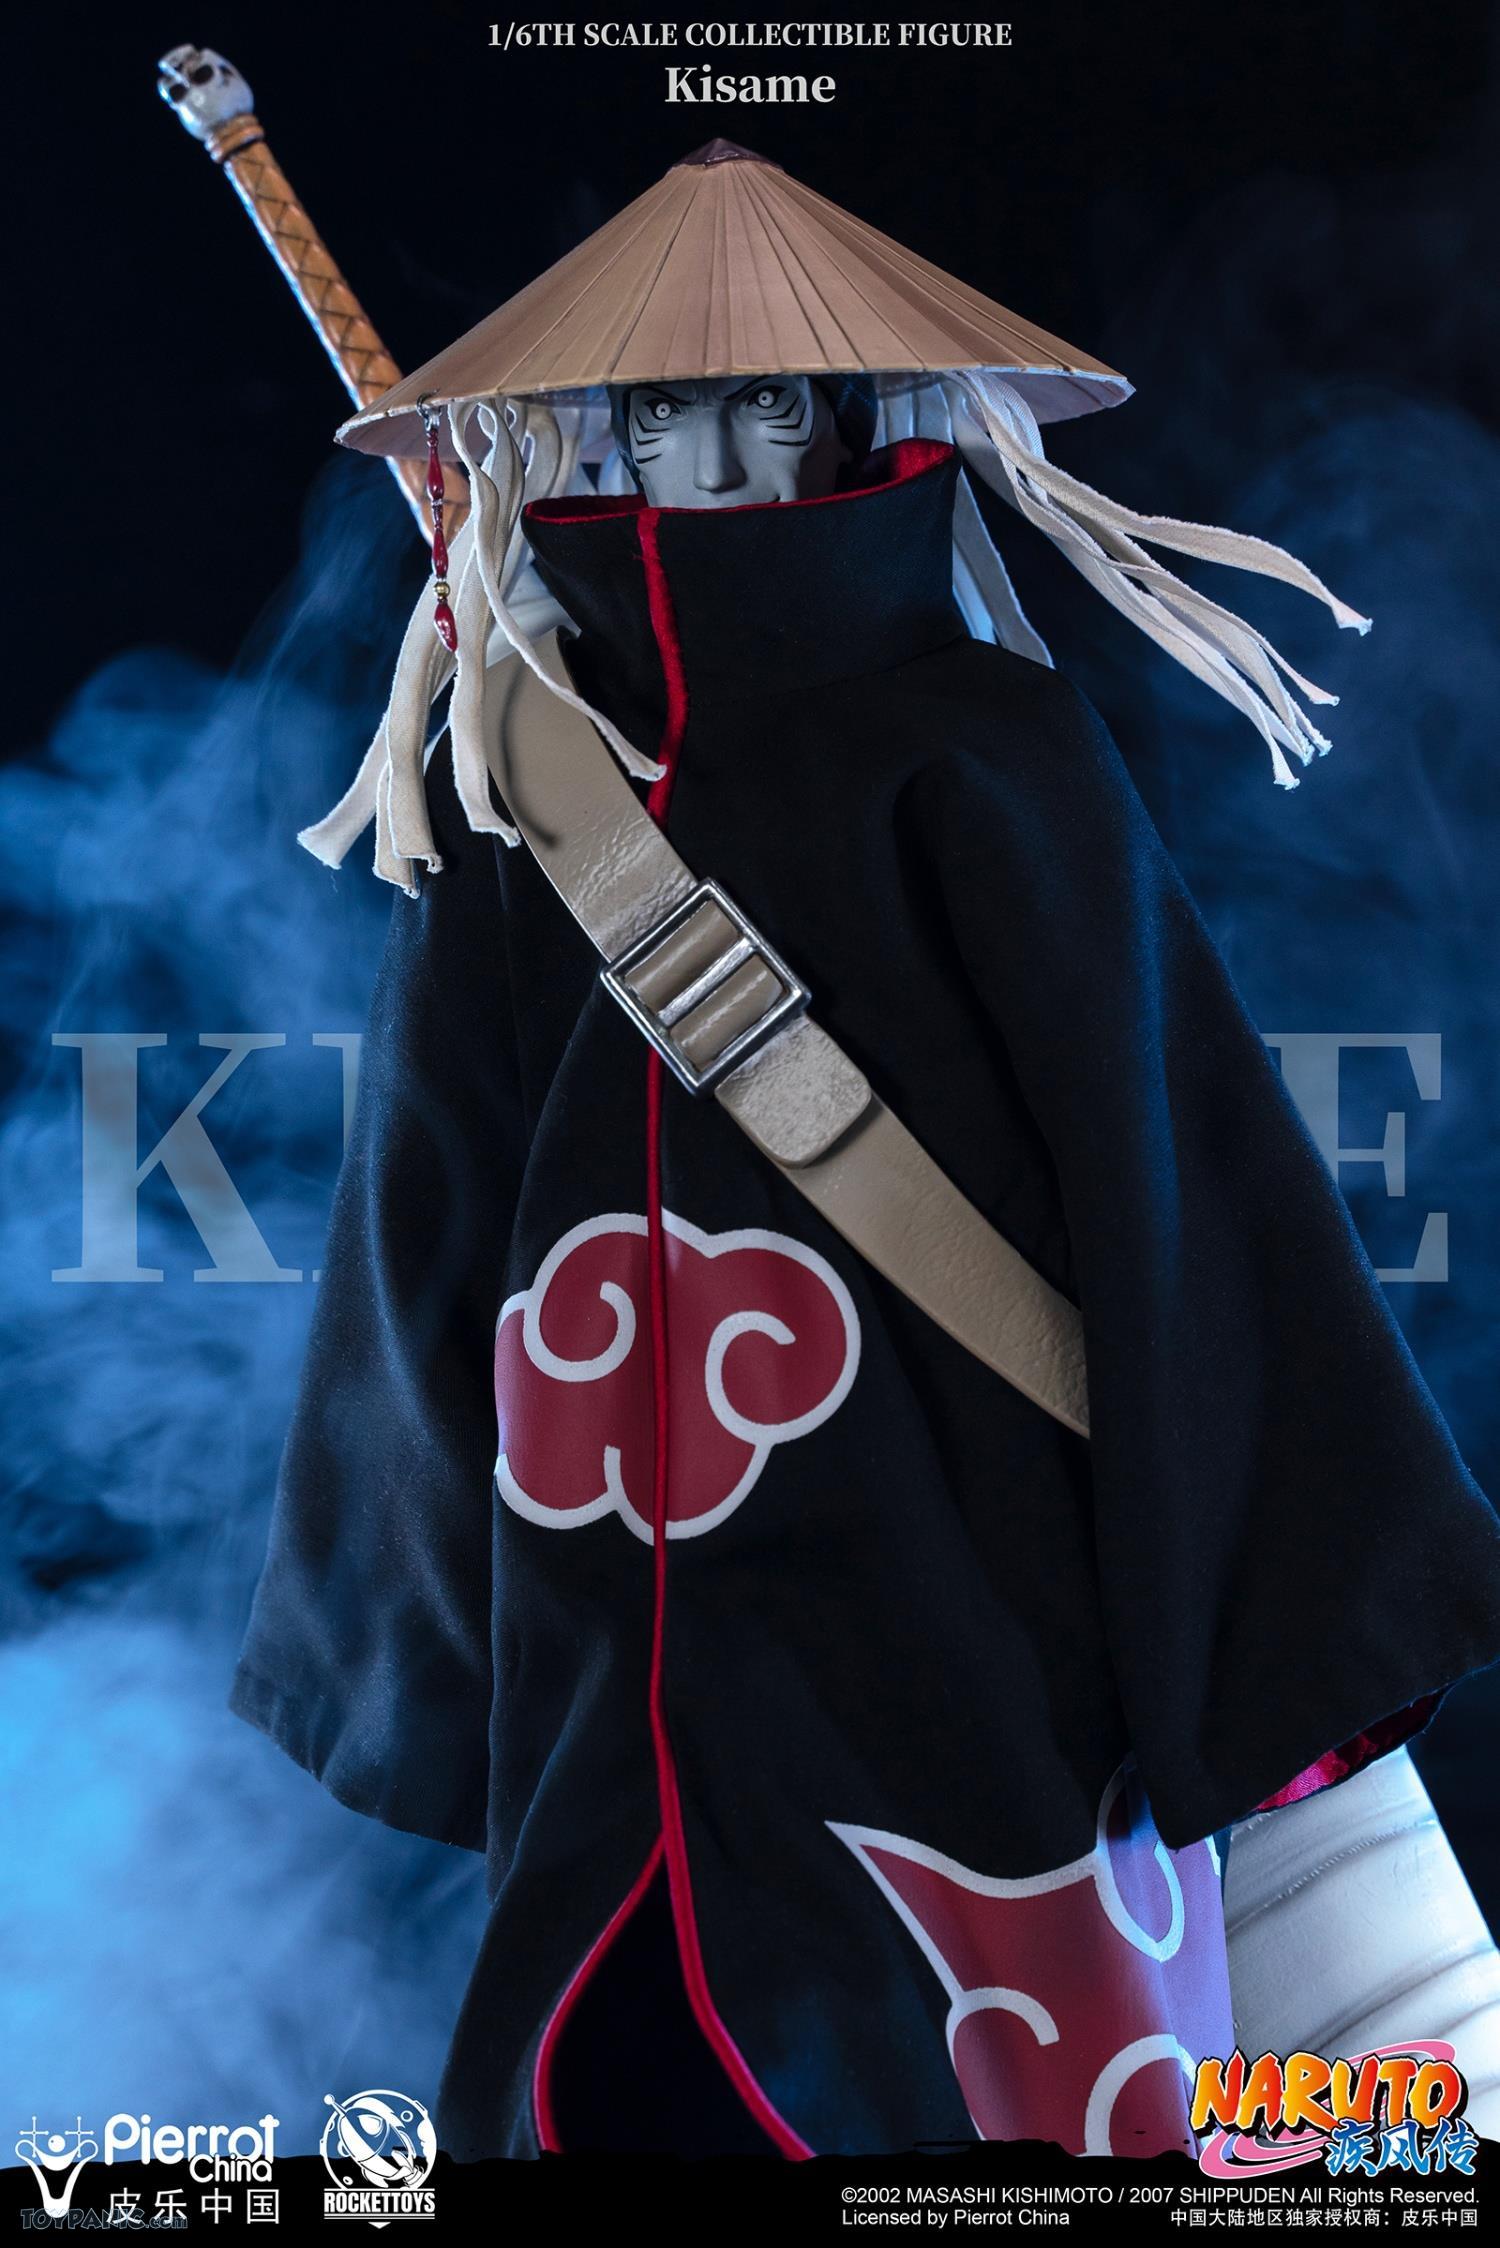 fantasy - NEW PRODUCT: Rocket Toys ROC-007 1/6 Scale Kisame 221202460439PM_517257